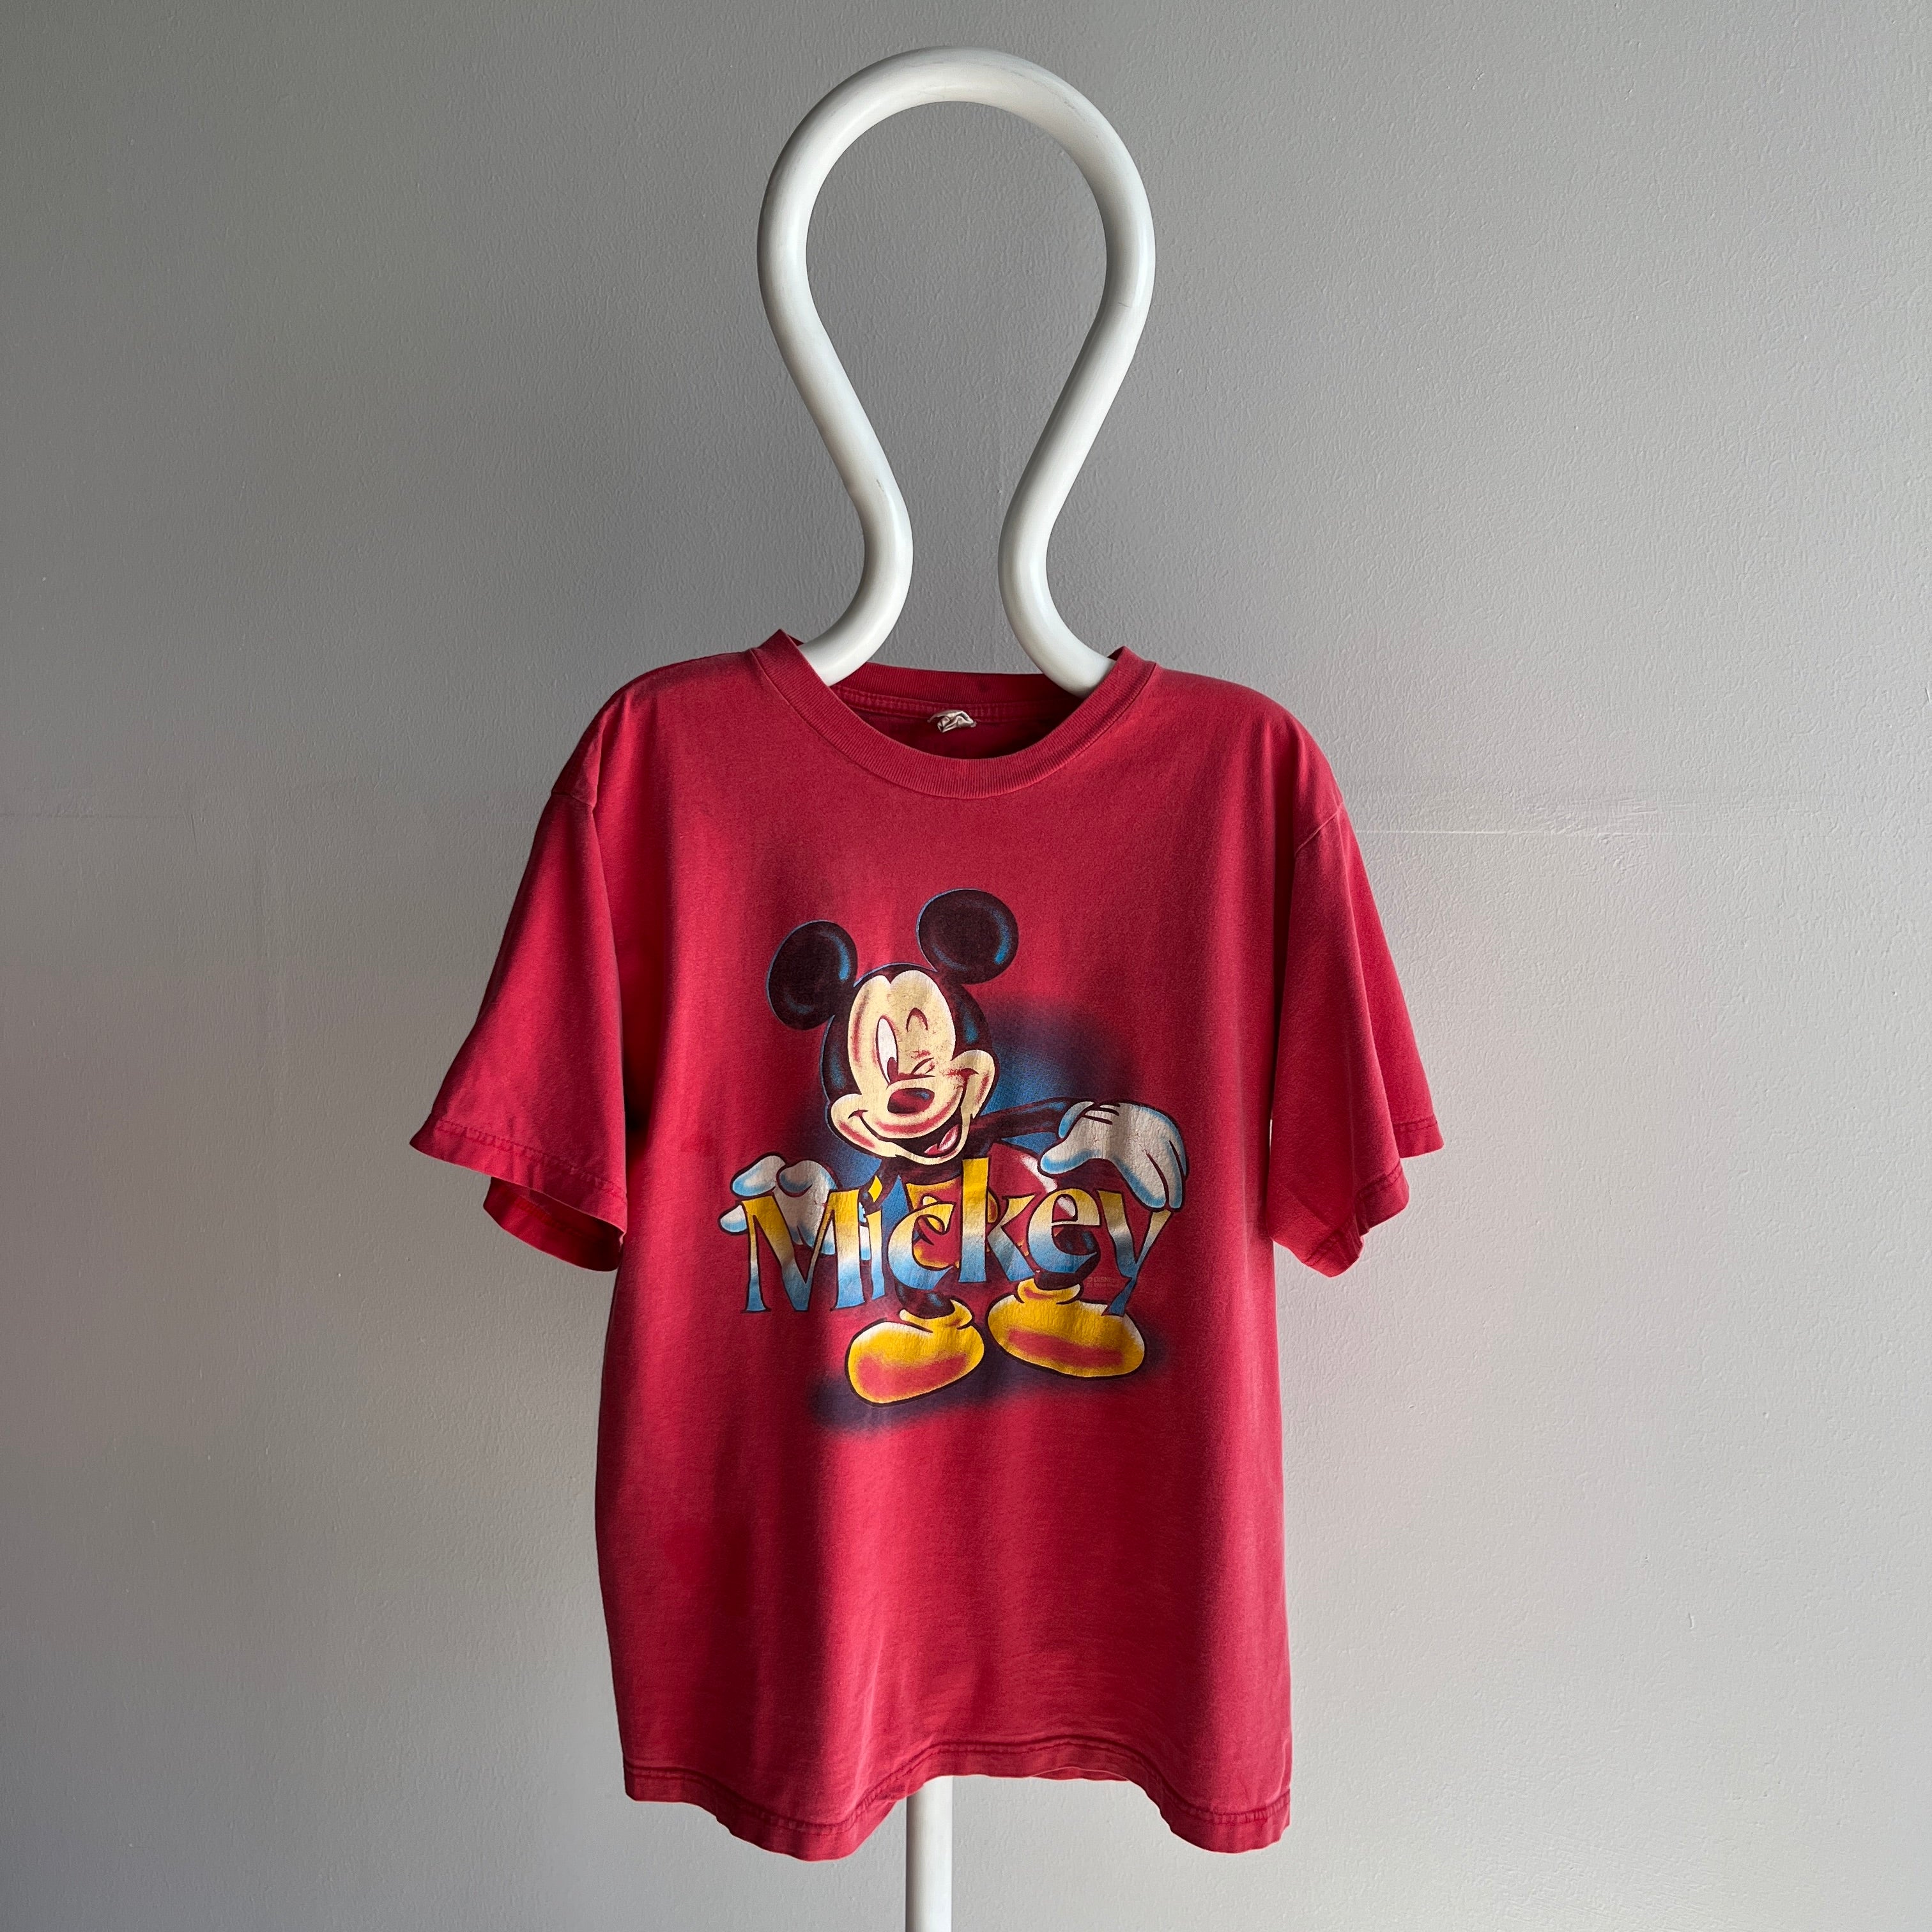 1990/2000s Faded Worn and Ink (?) Paint (?) Stained Mickey T-Shirt